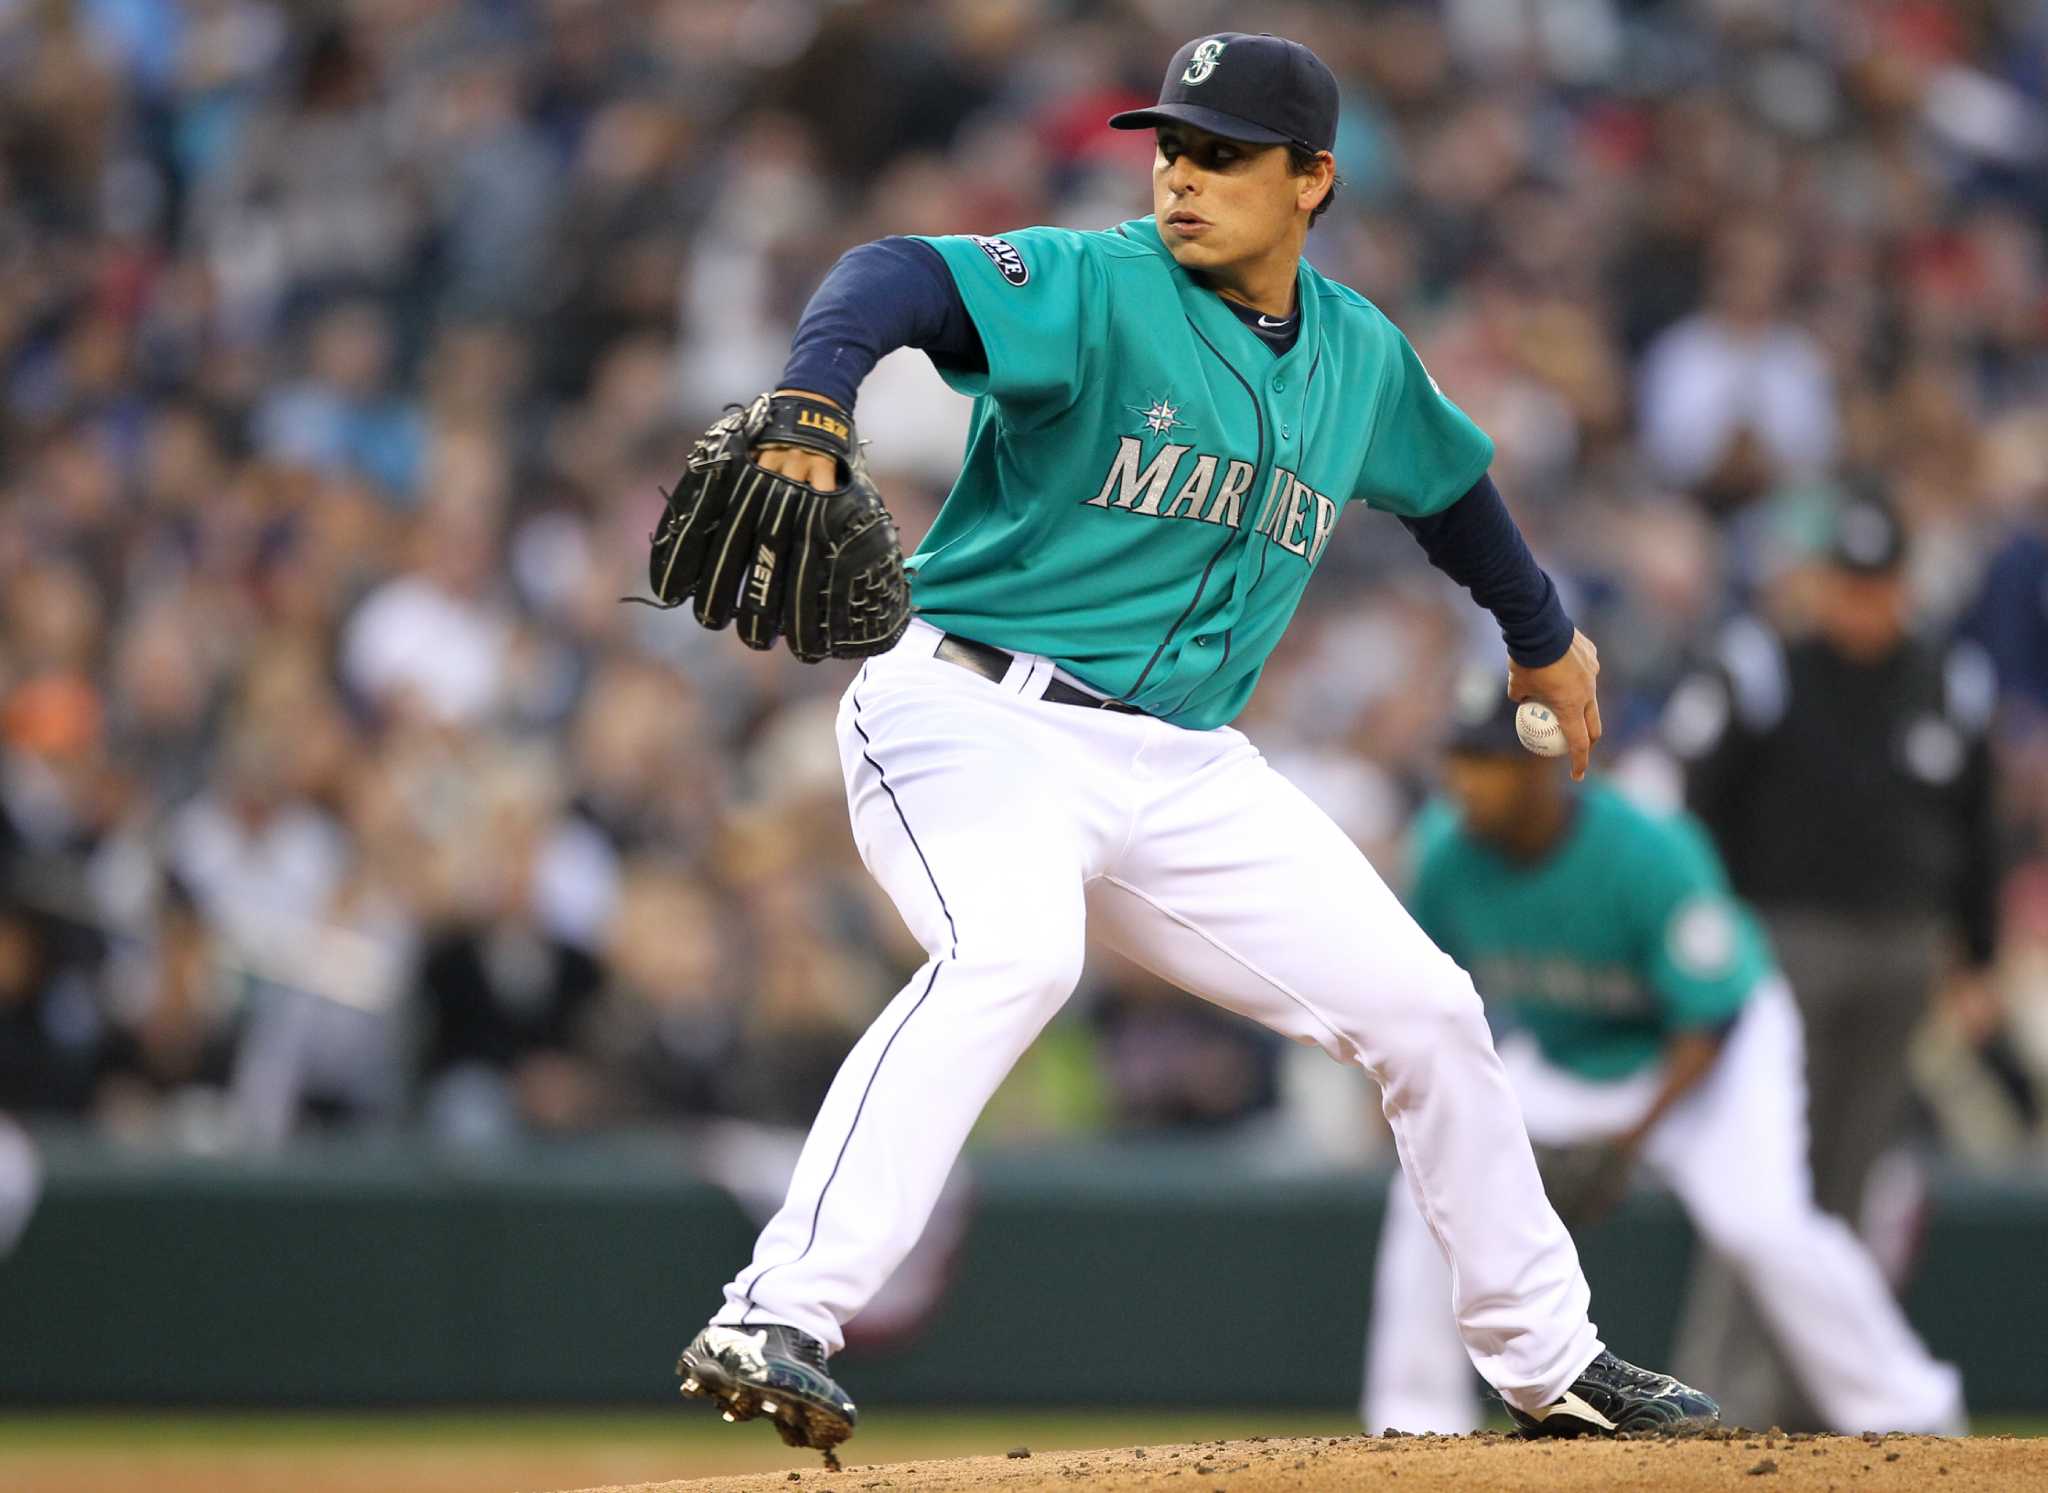 Seattle Mariners ditching road, spring training jerseys due to MLB